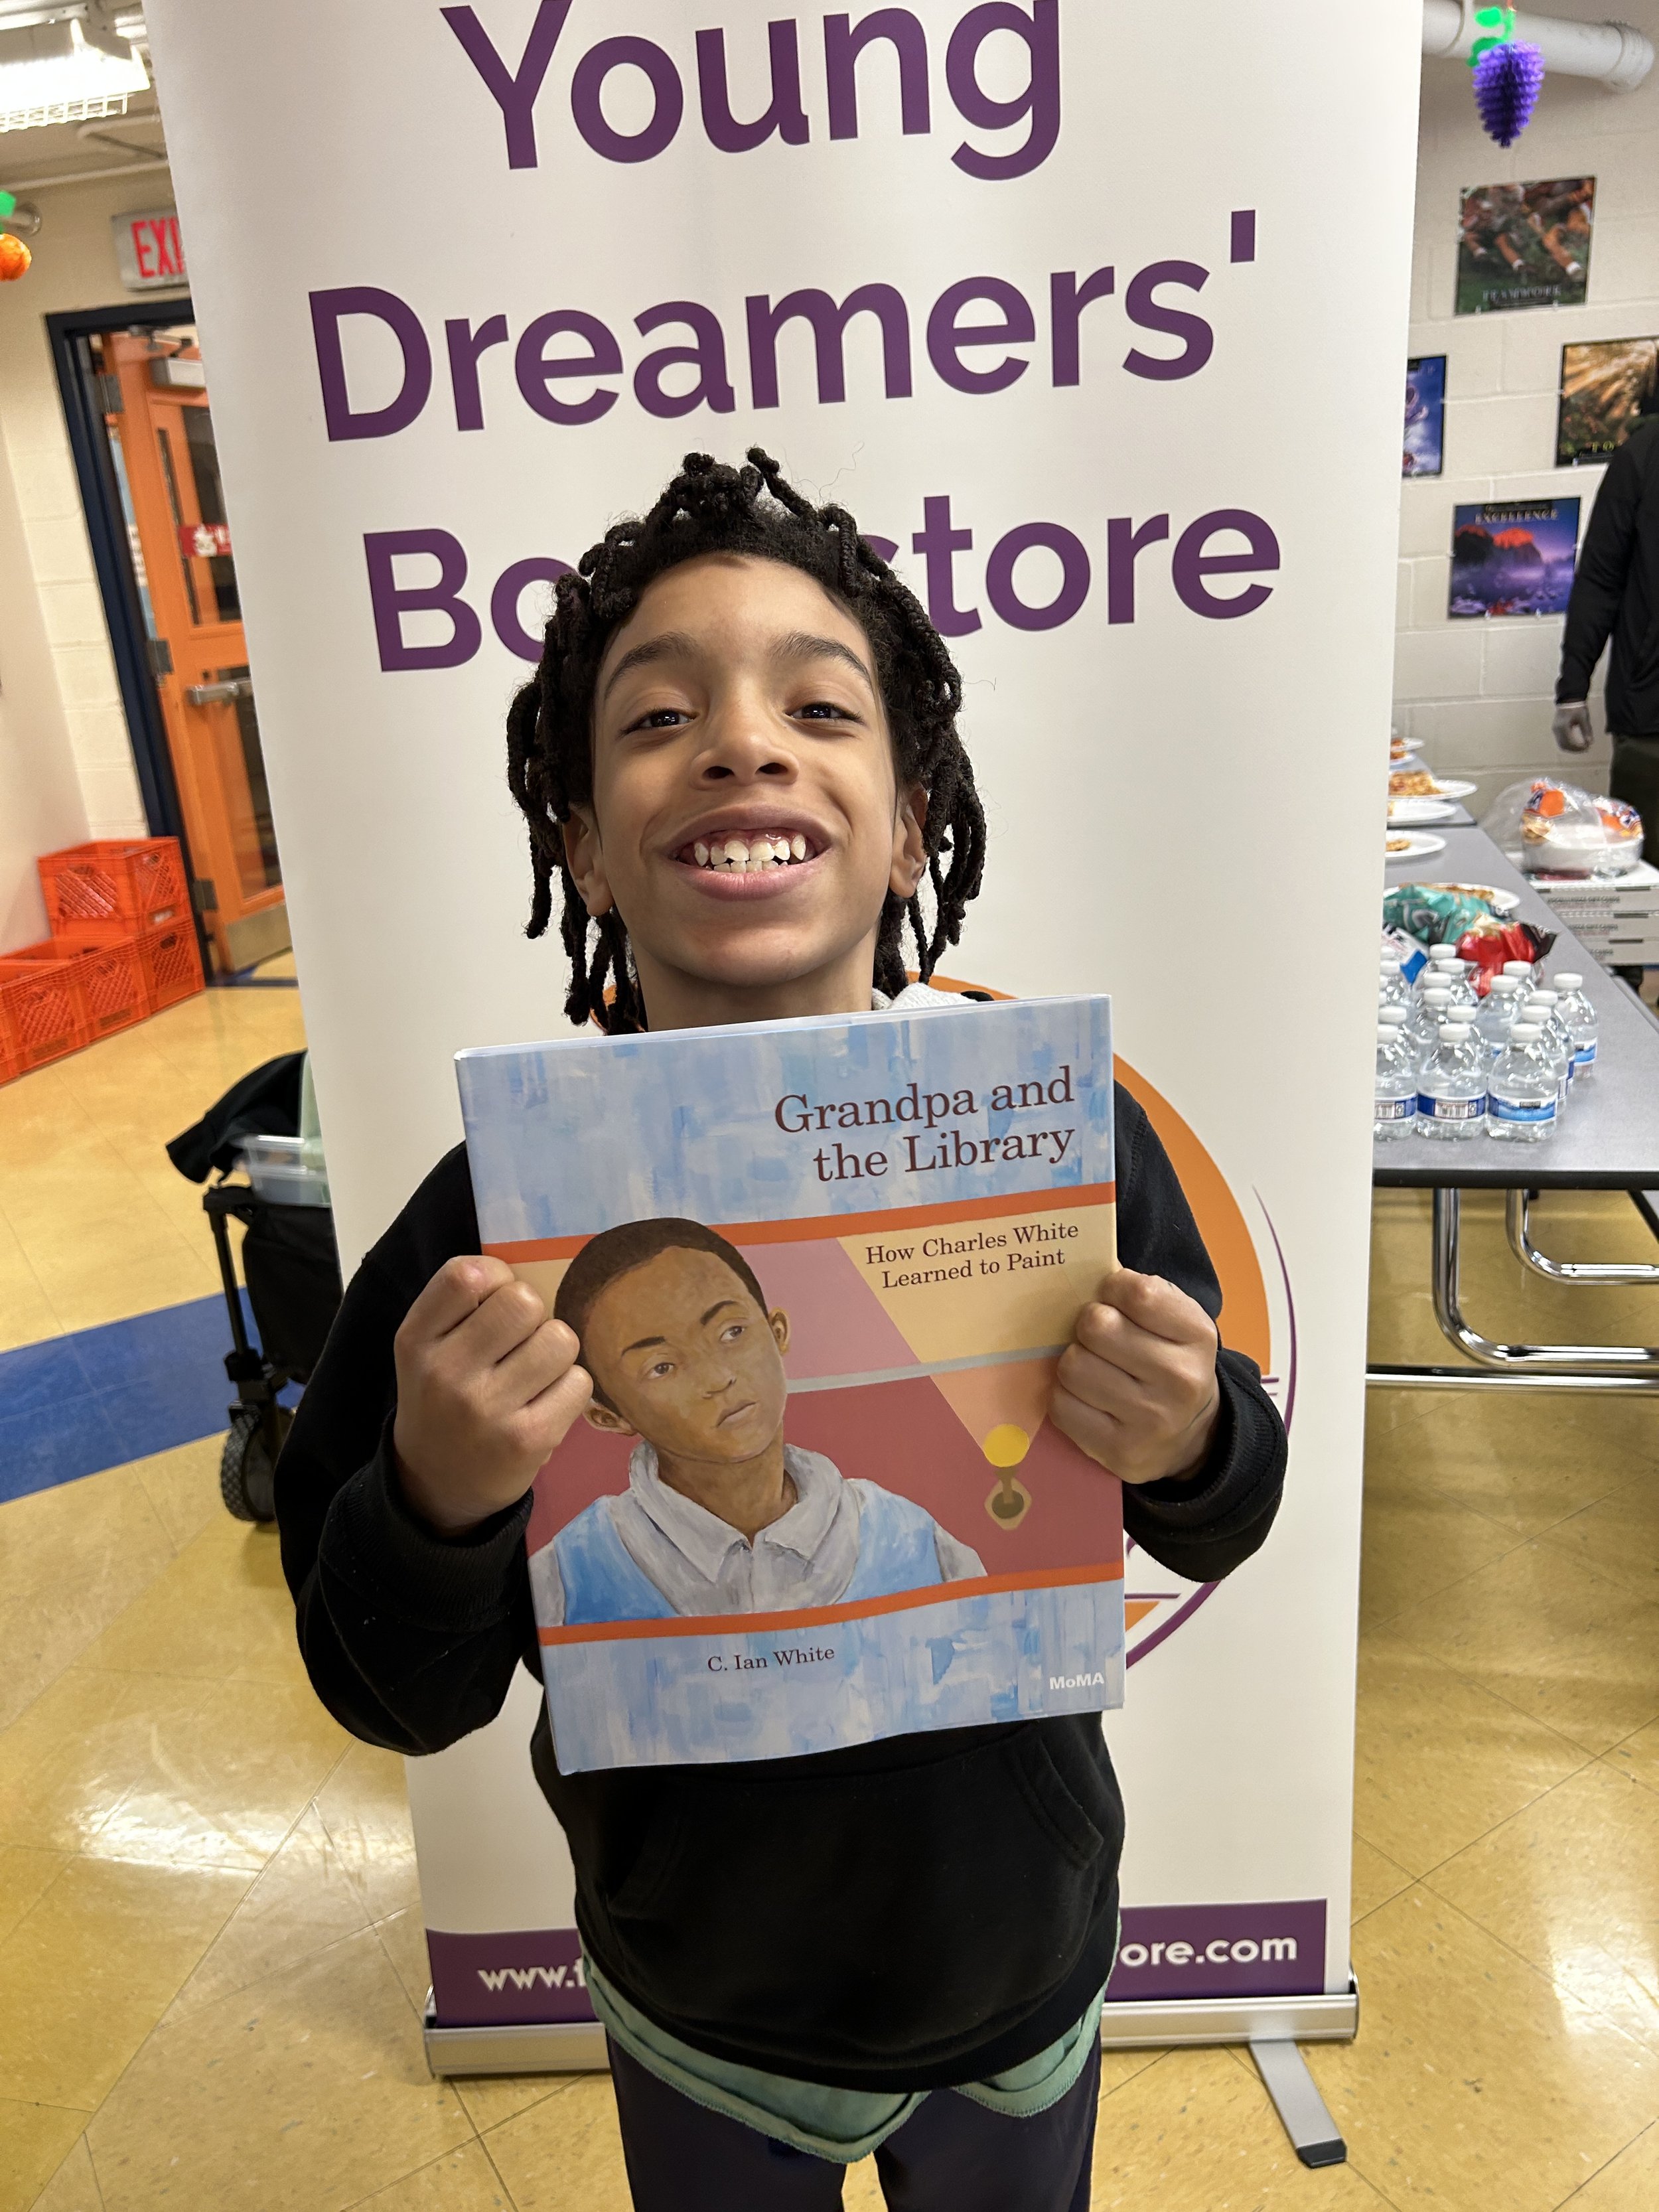 The Young Dreamers' Bookstore